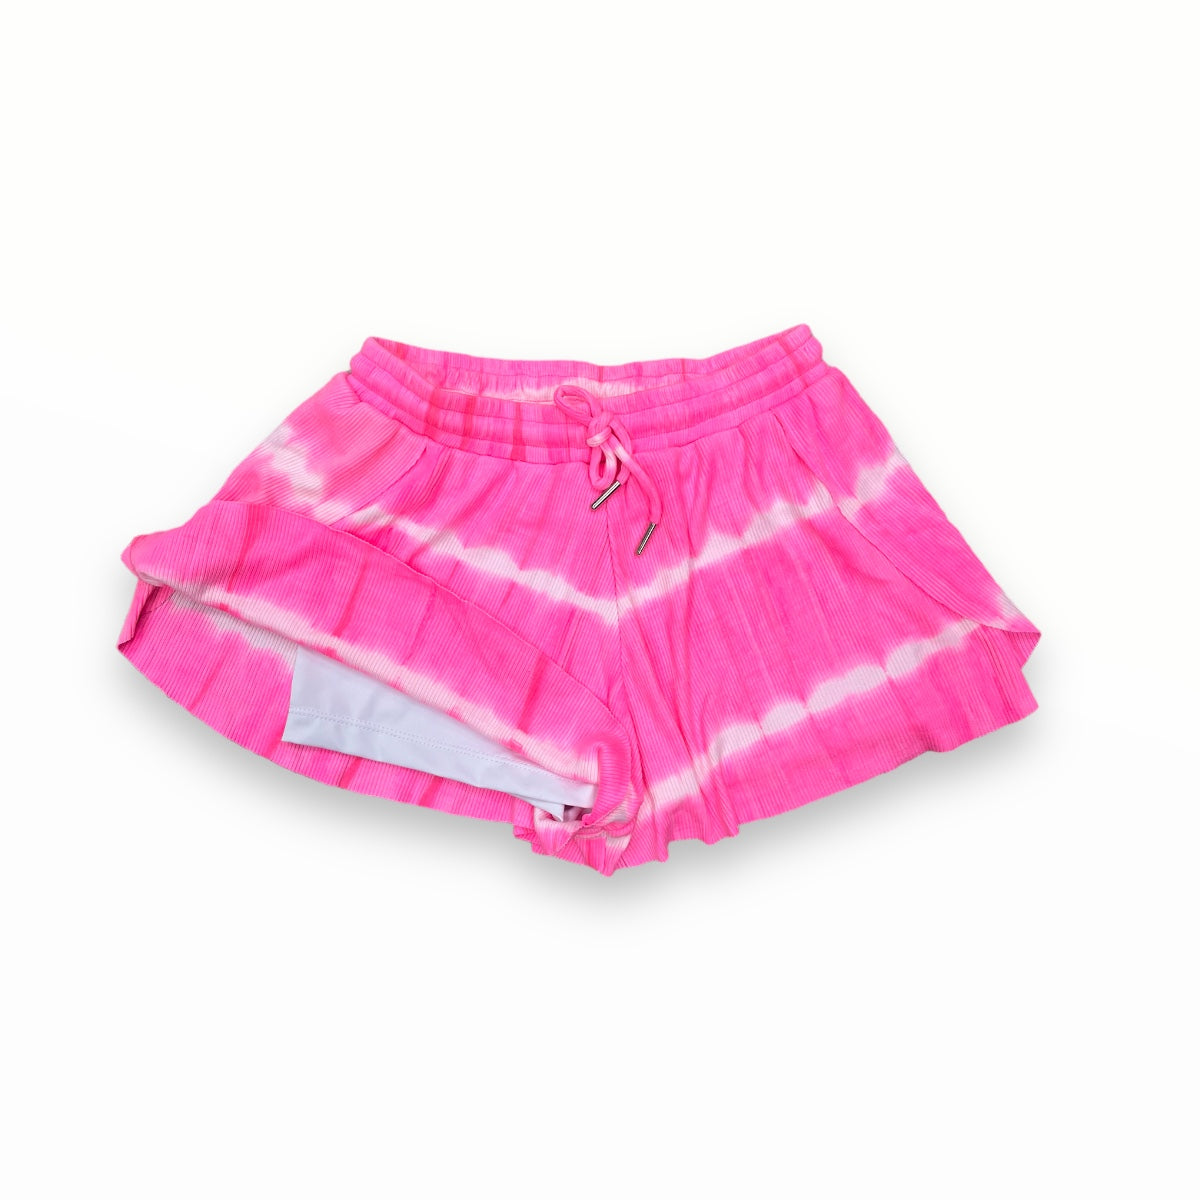 FLOWERS BY ZOE FLOWY SHORTS - NEON PINK/ WHITE LINES